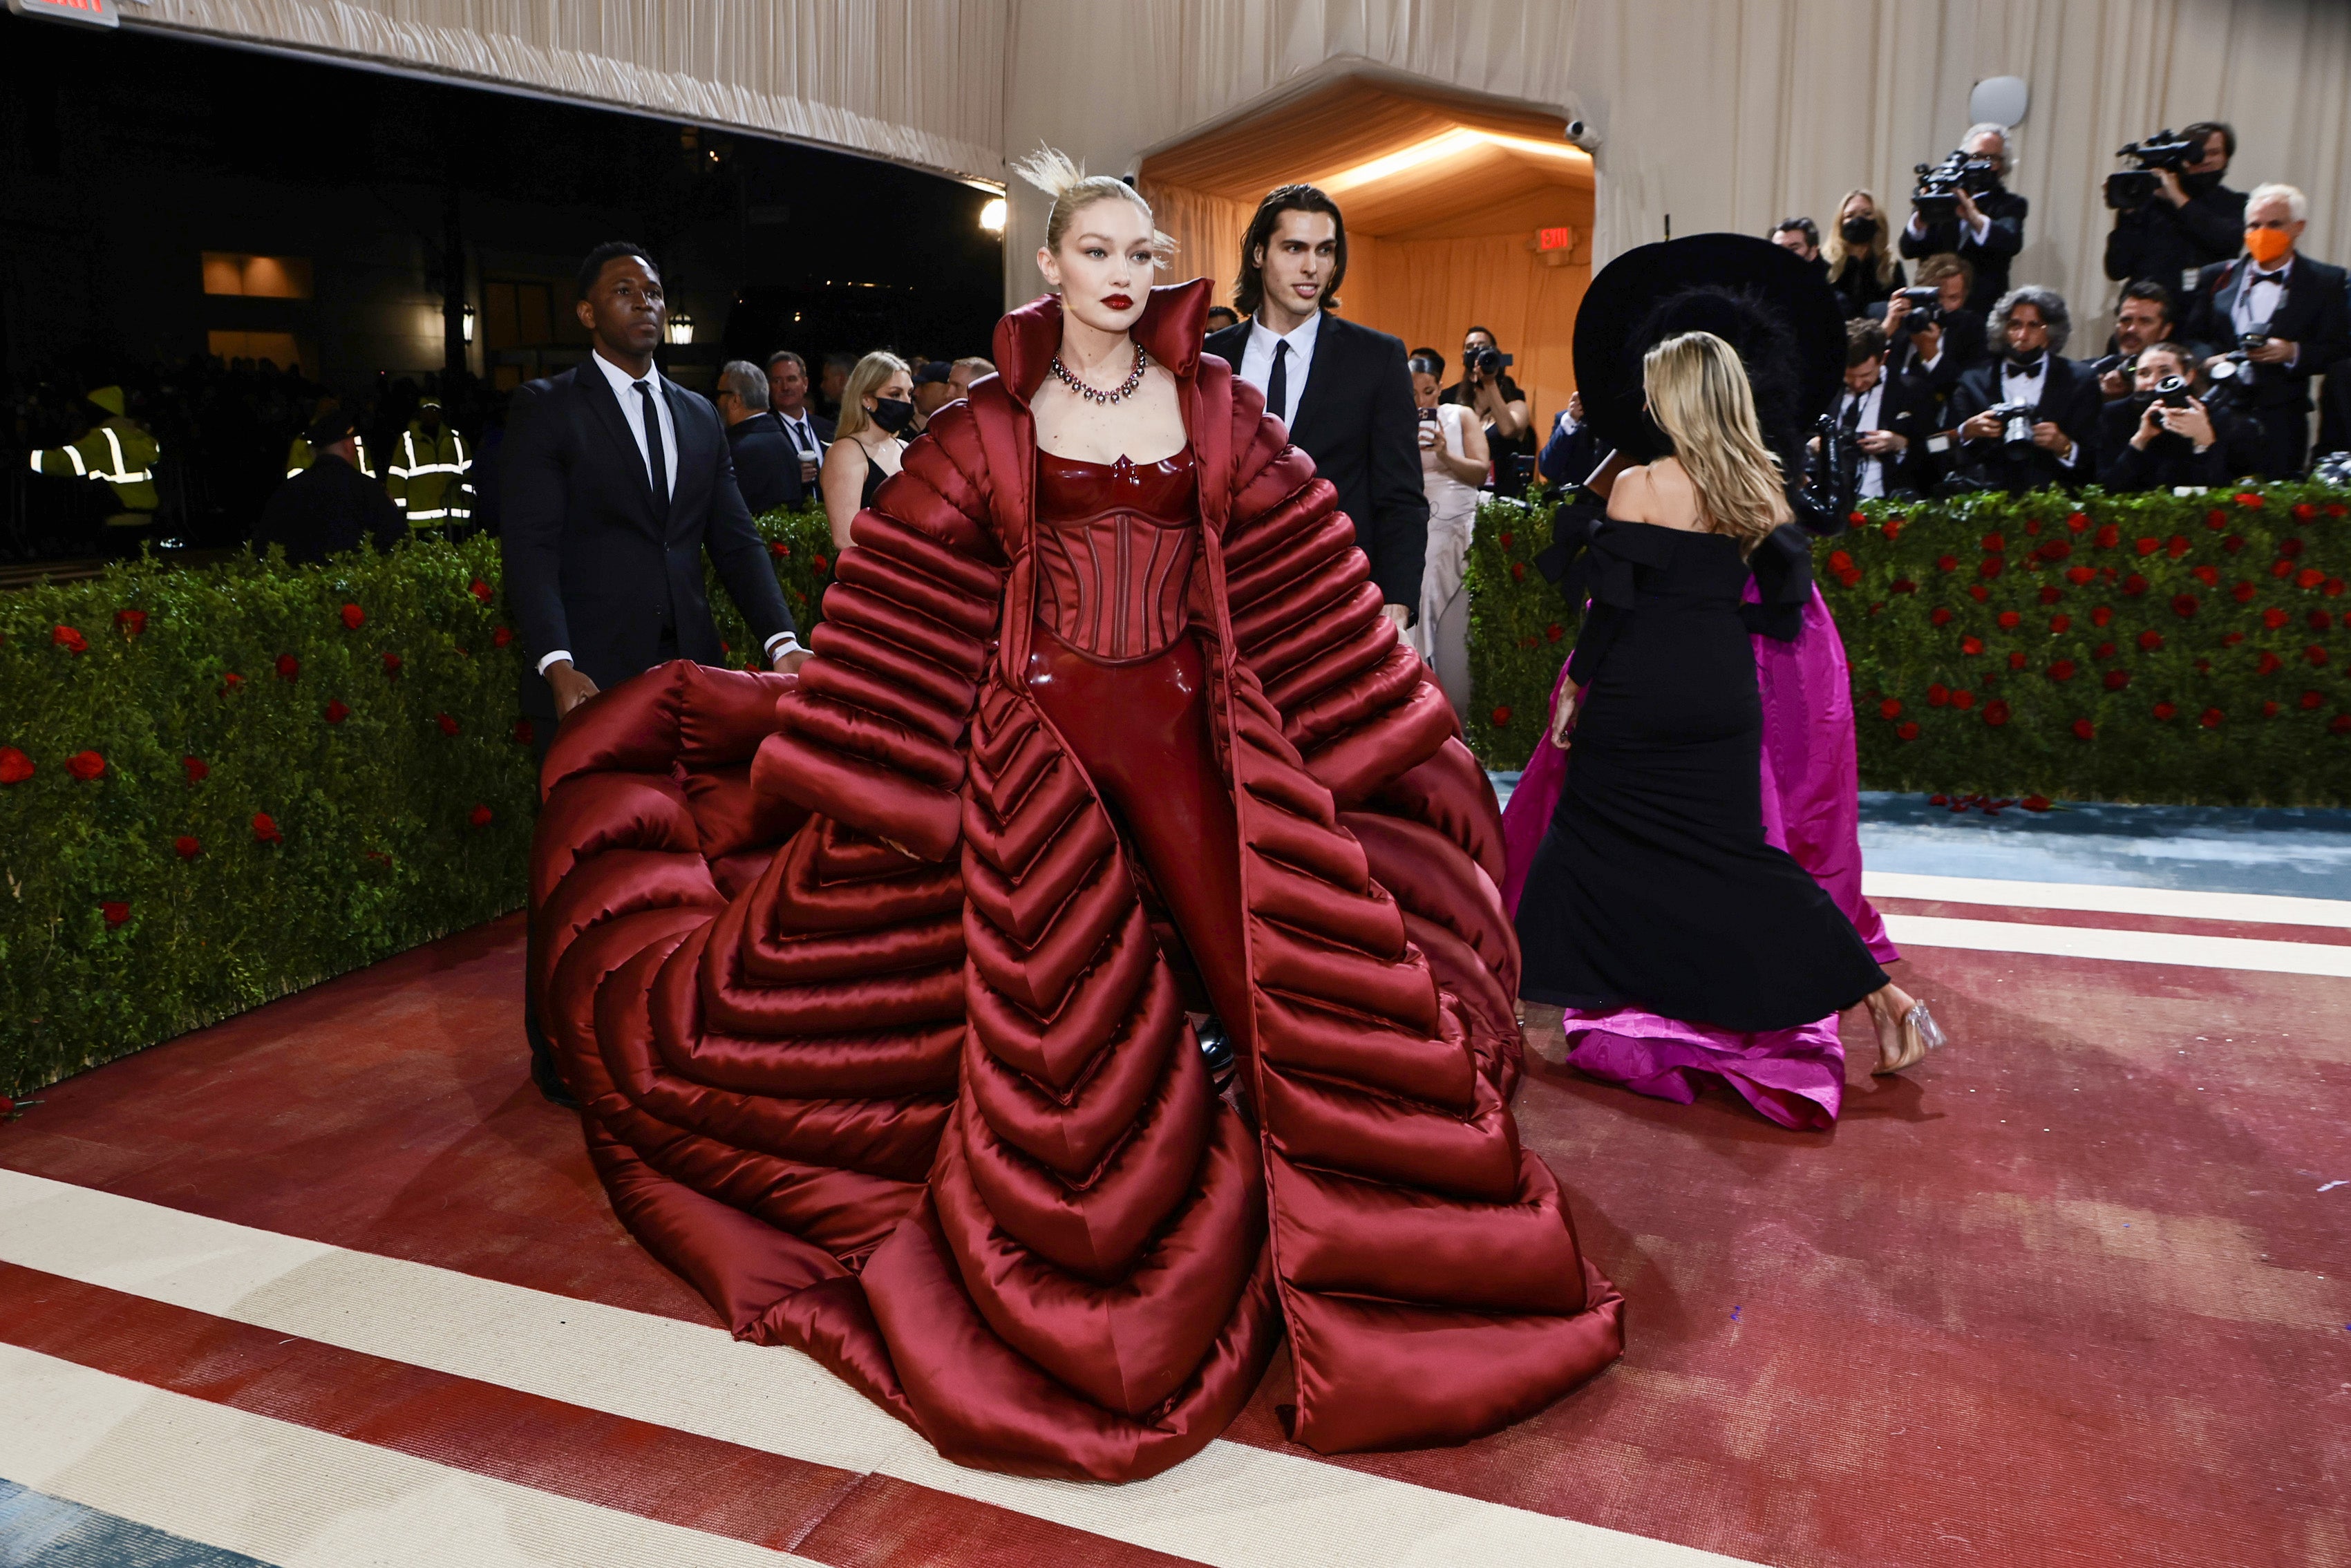 Met Gala 2022: See All the Best-Dressed Celebrity Red Carpet Outfits